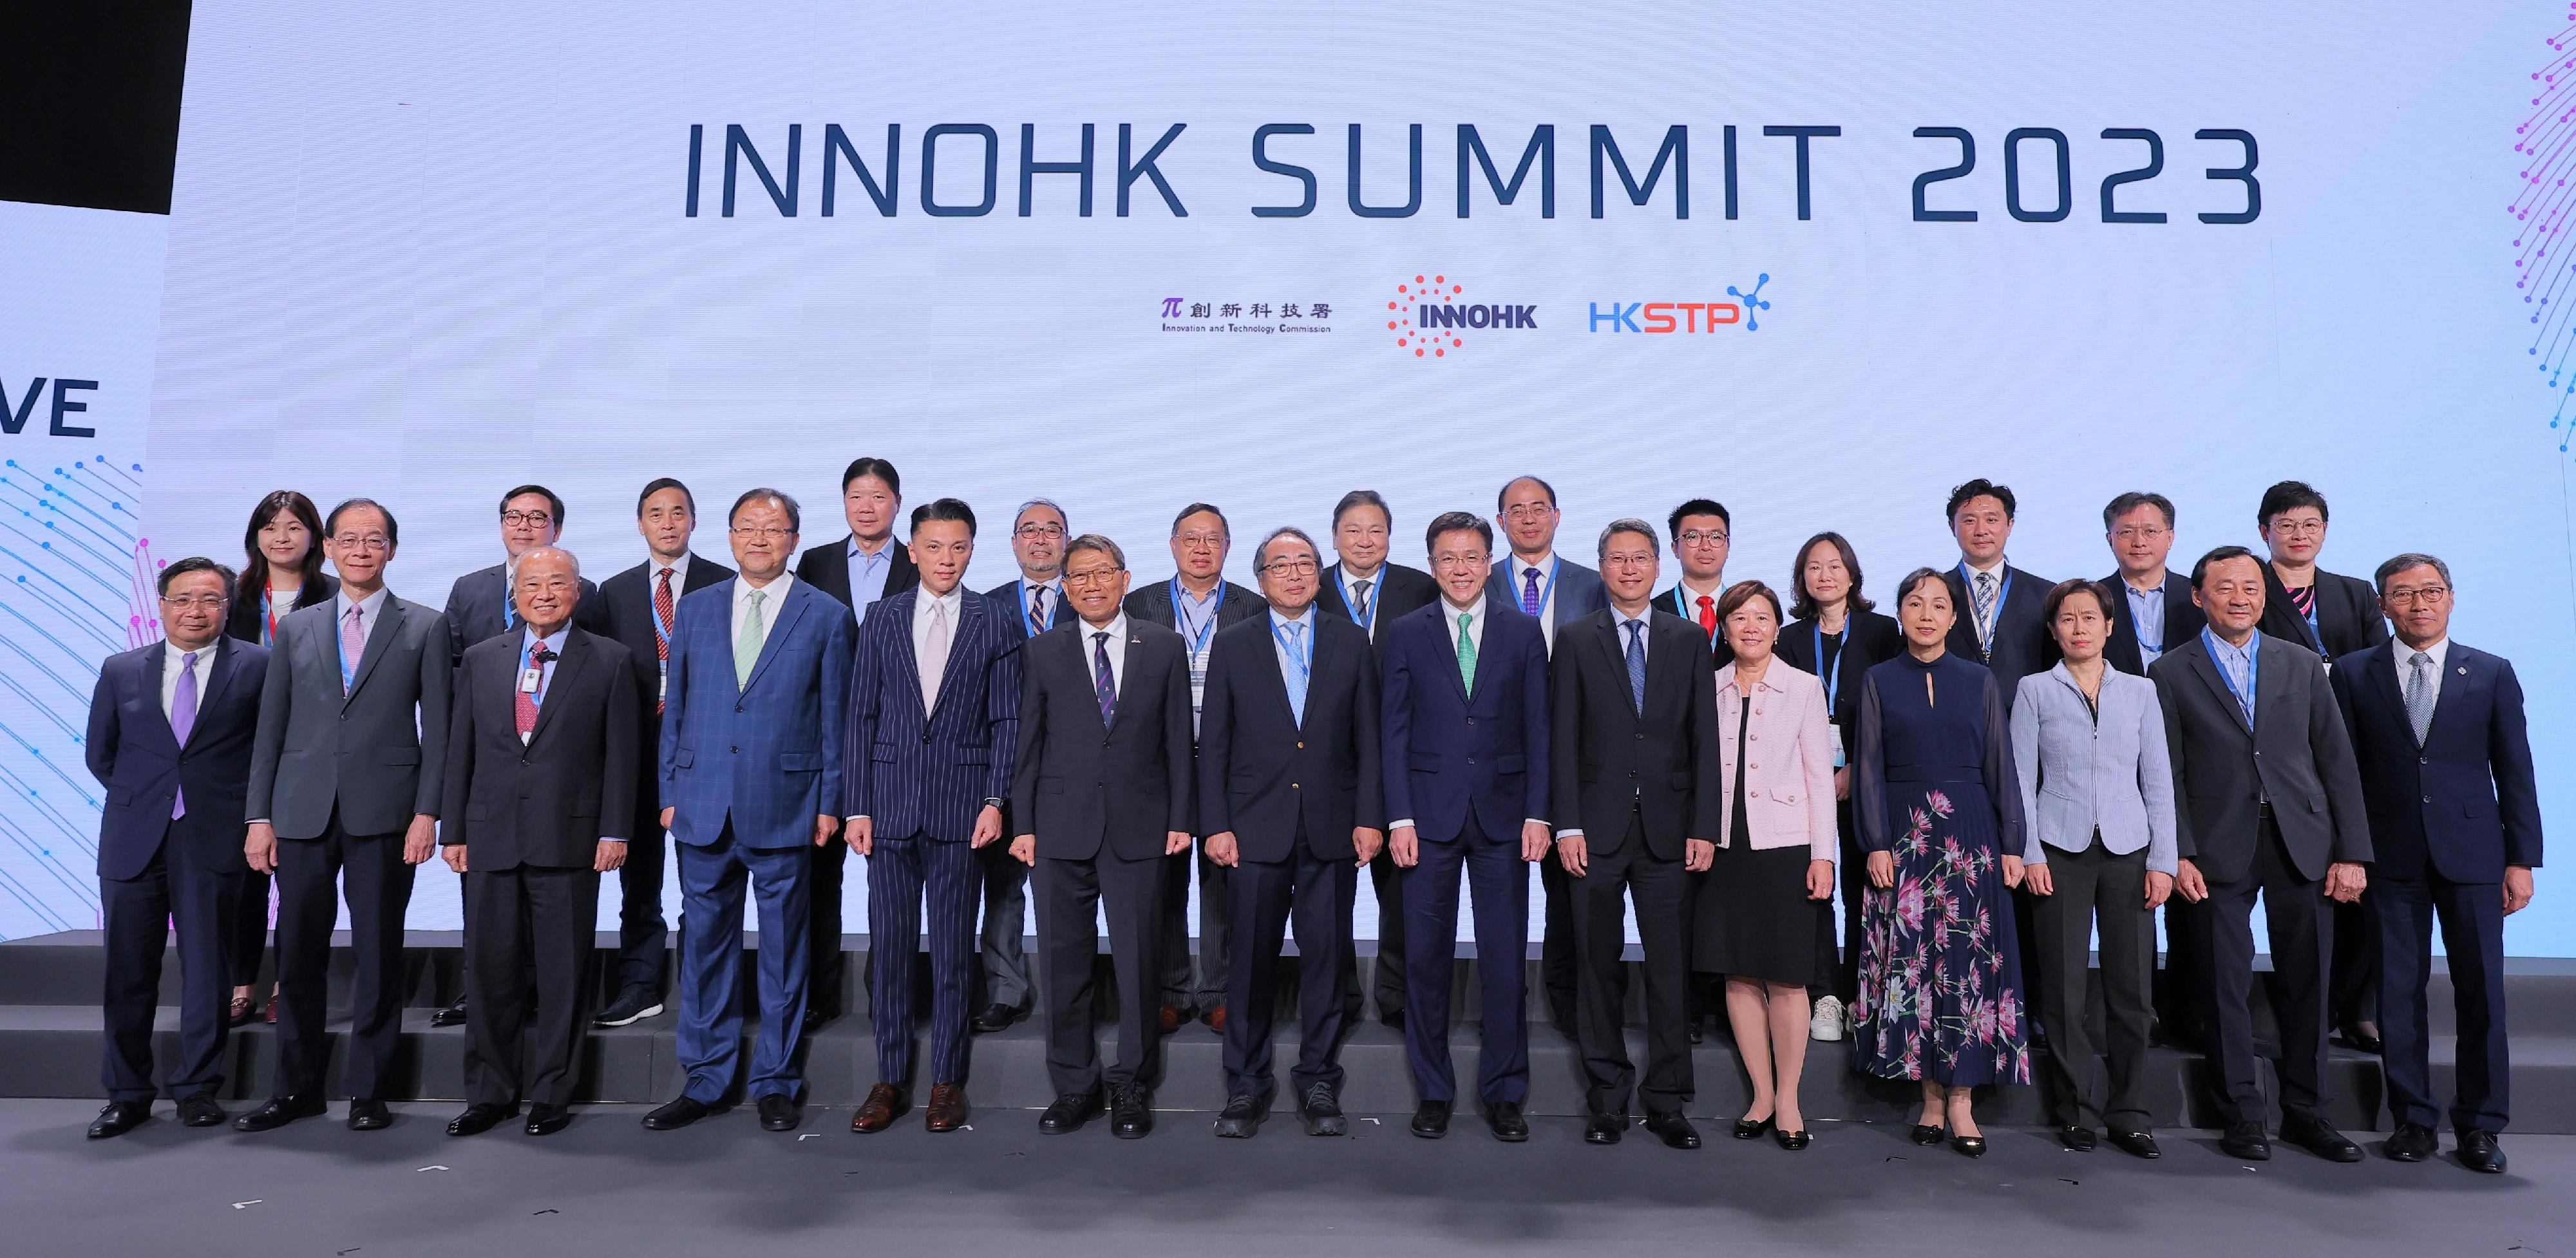 Organised by the Innovation and Technology Commission and the Hong Kong Science and Technology Parks Corporation (HKSTPC), the InnoHK Summit 2023 was held at Hong Kong Science Park today (December 6). Photo shows the Secretary for Innovation, Technology and Industry, Professor Sun Dong (front row, seventh right); the Founding President of the Hong Kong Academy of Sciences and Chairman of the InnoHK Steering Committee, Professor Tsui Lap-chee (front row, seventh left); the Permanent Secretary for Innovation, Technology and Industry, Mr Eddie Mak (front row, sixth right); Deputy Director-General of the Department of Educational, Scientific and Technological Affairs of the Liaison Office of the Central People's Government in the Hong Kong Special Administrative Region Ms Wu Cheng (front row, fourth right); the Commissioner for Innovation and Technology, Mr Ivan Lee (front row, first left); and the Chief Executive Officer of the HKSTPC, Mr Albert Wong (front row, first right), with members from the InnoHK Steering Committee, members of the Board of the HKSTPC, presidents, chairmen and representatives of universities and institutions participating in InnoHK, and other guests.
